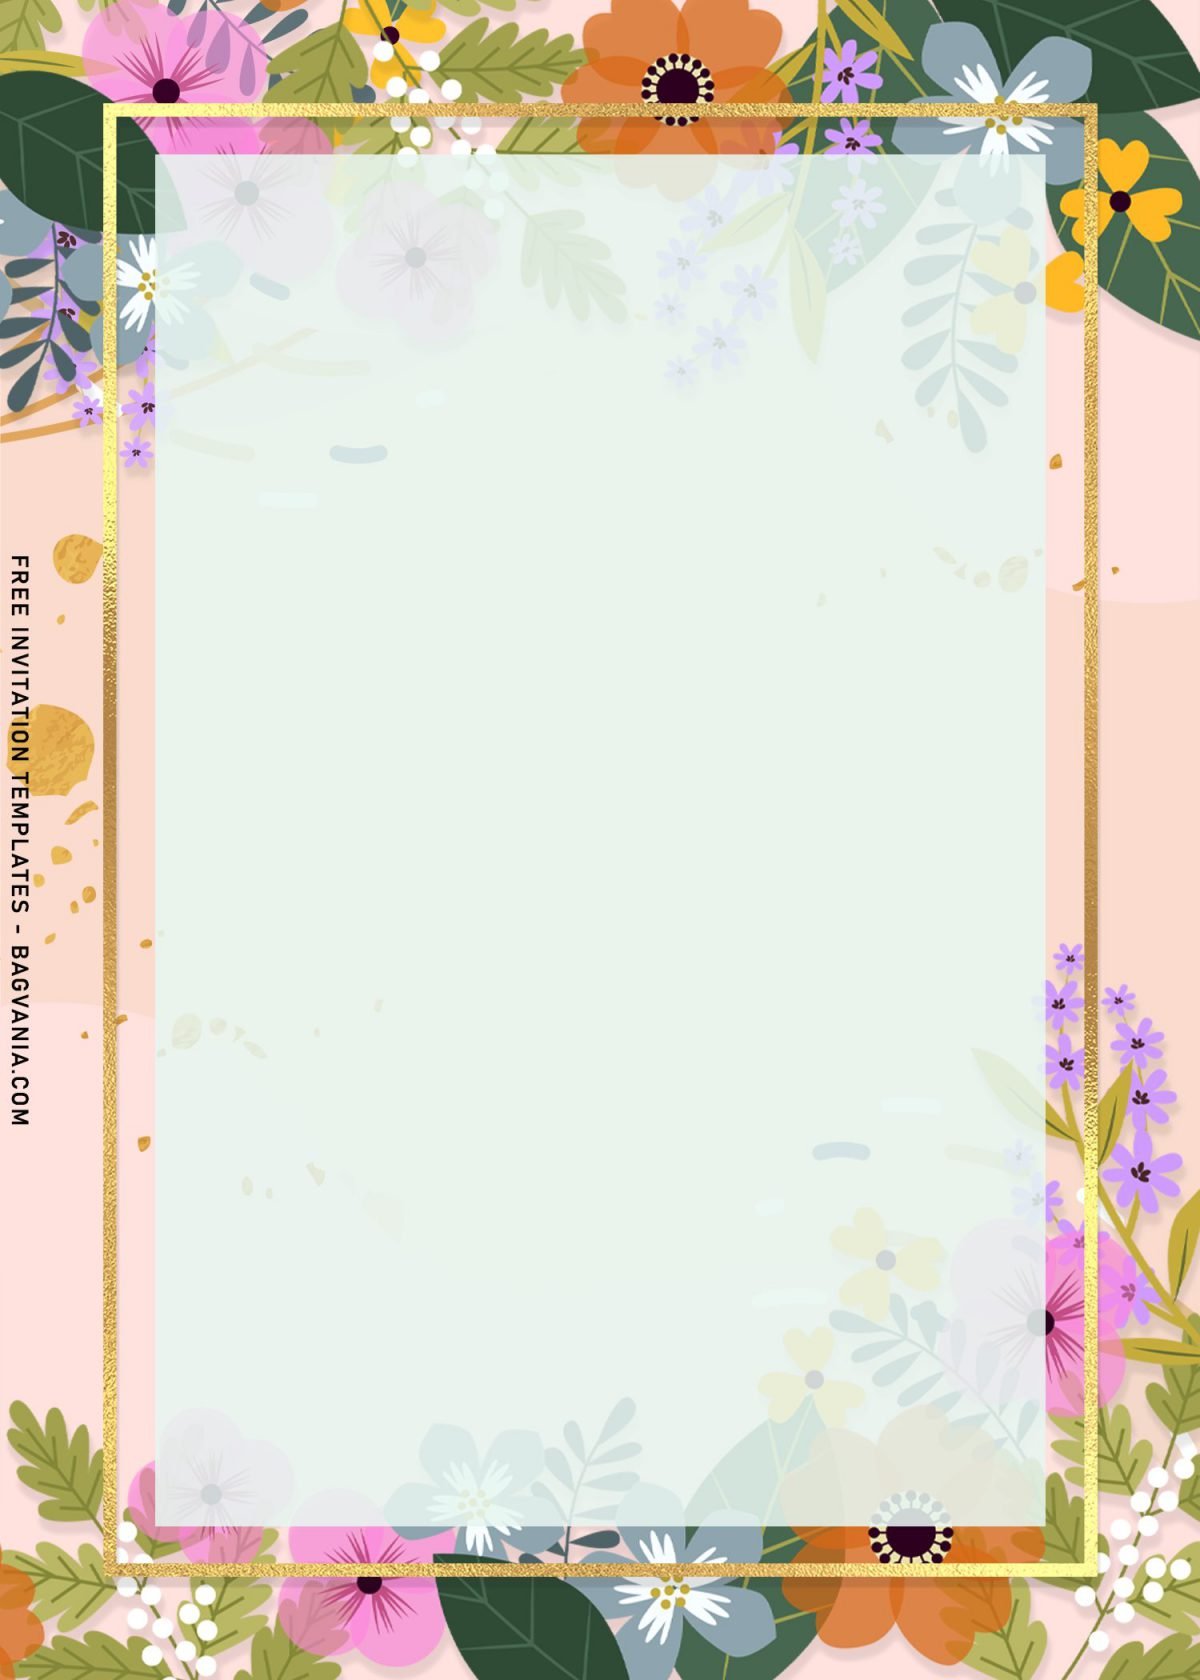 8+ Blooming Spring Floral Birthday Invitation Templates and has sparkling gold frame border